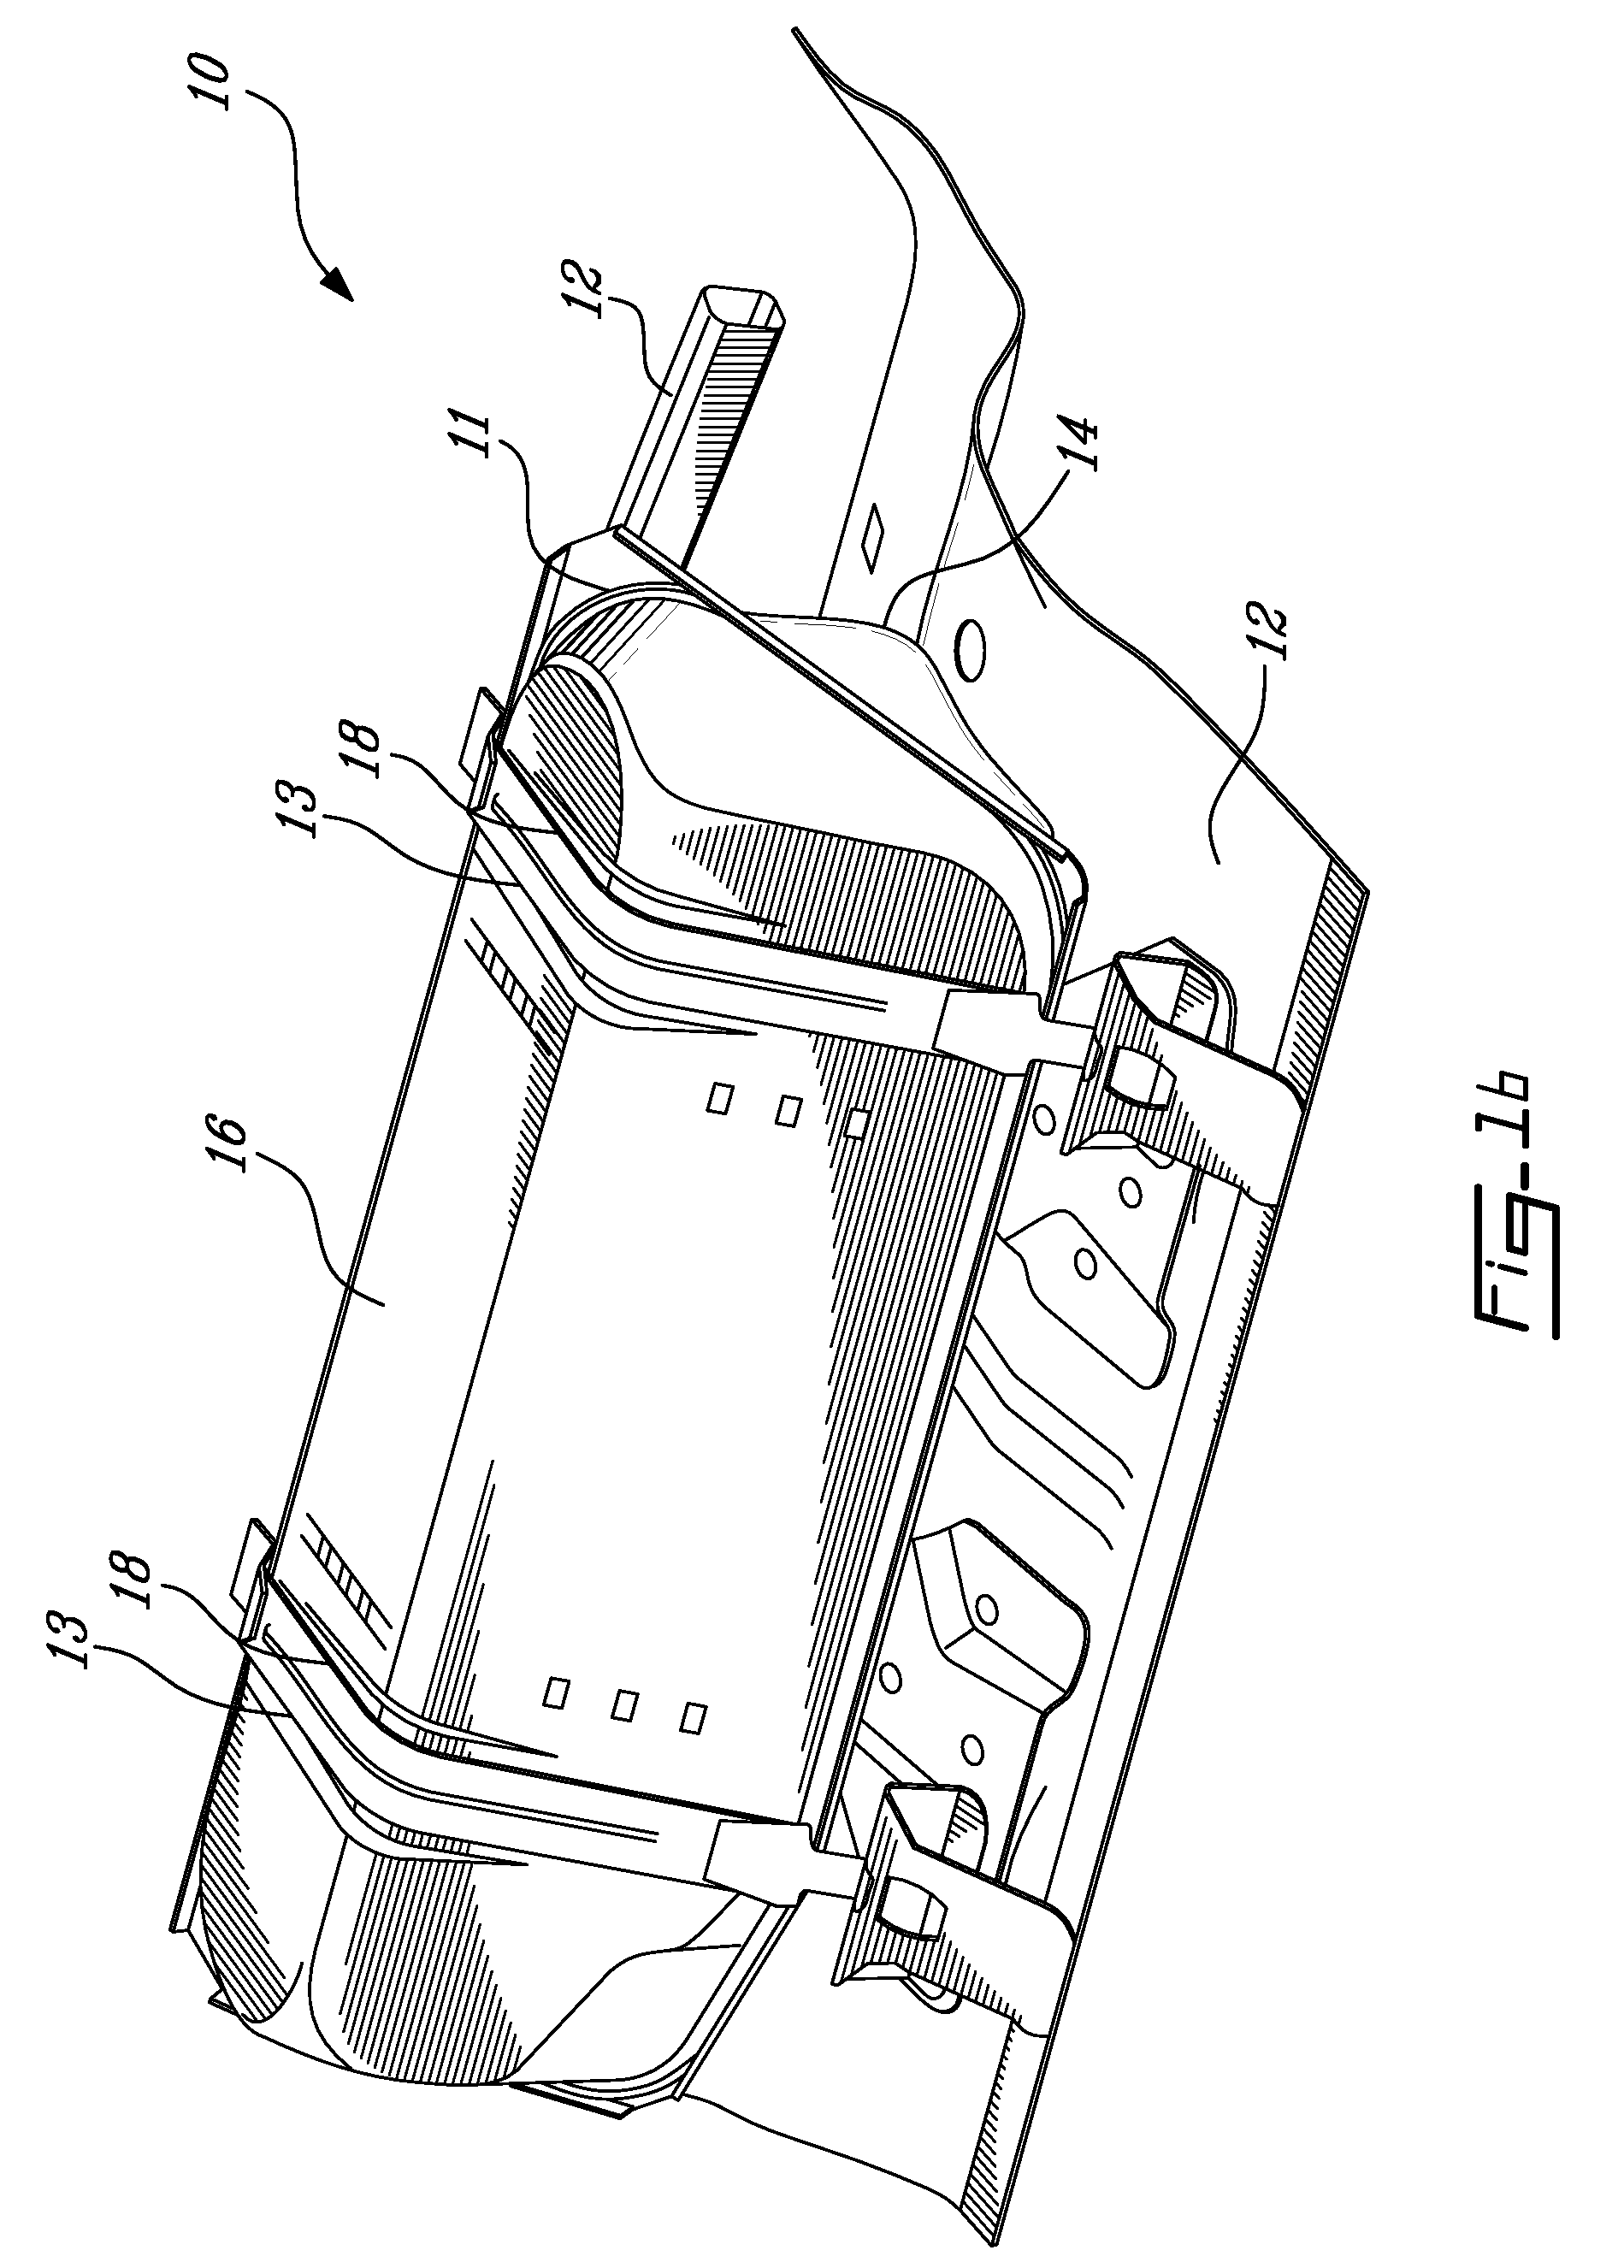 Fuel tank shell with structural support